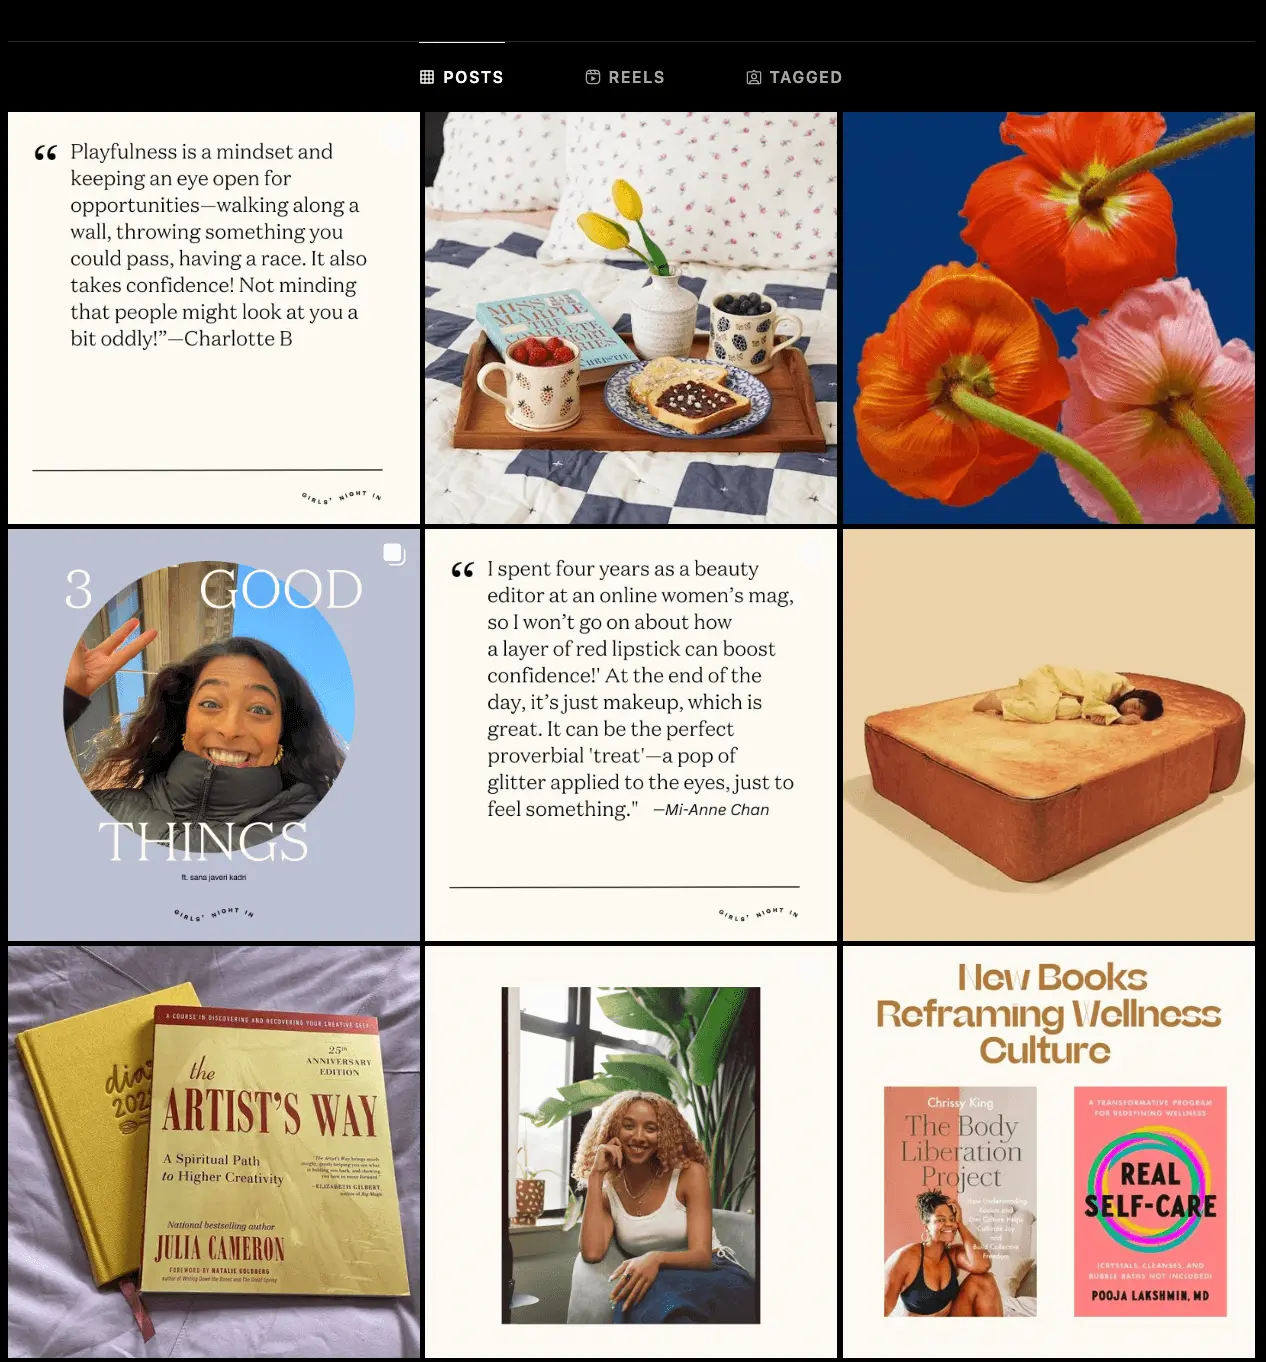 An Instagram feed that shows repurposed email newsletter content